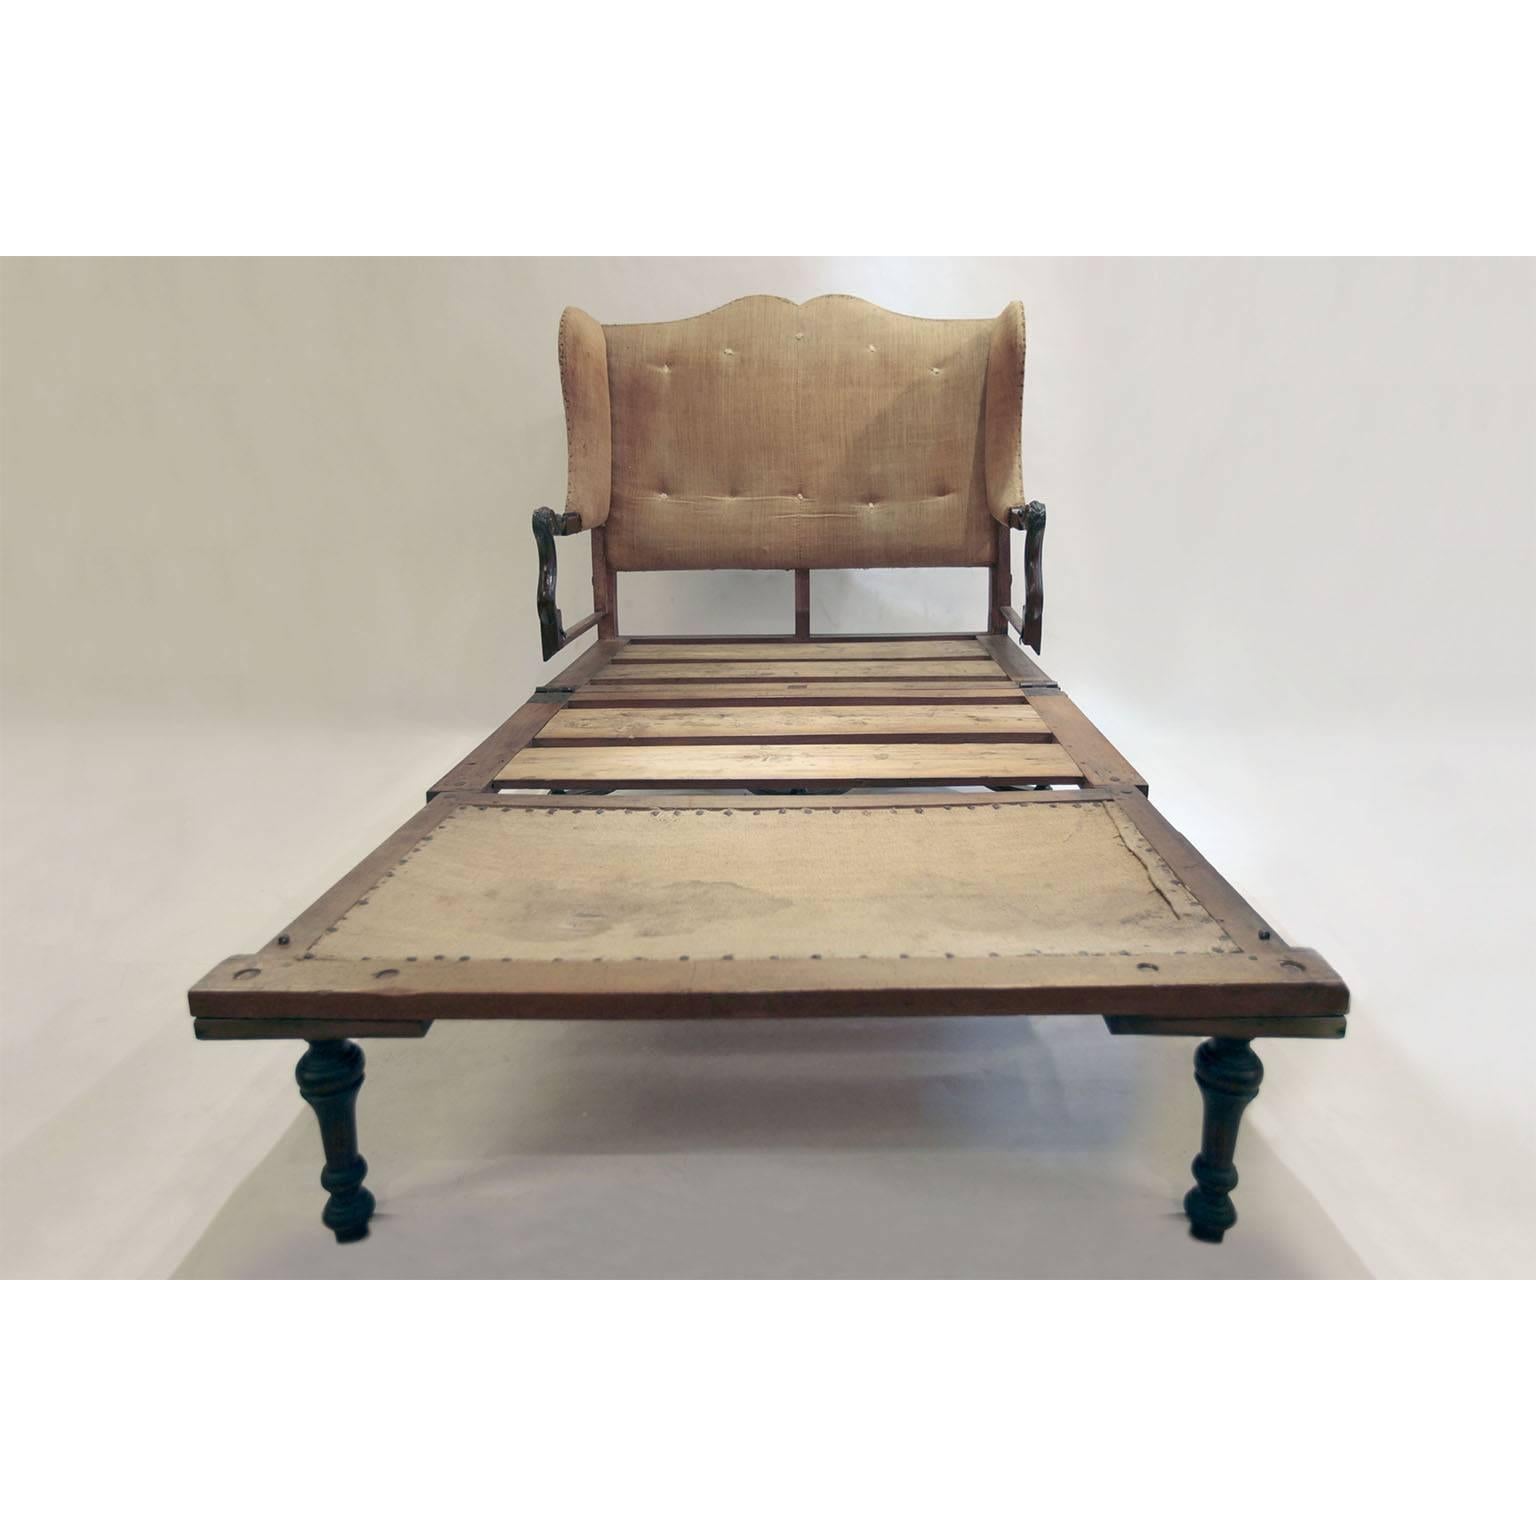 17th century Italian sofa-bed in carved walnut dark stained.
Unique for style and fold up mechanism, it is possible to turn the sofa in a bed by opening the armrest and overturning the bed net.
Authentic padding and lining.